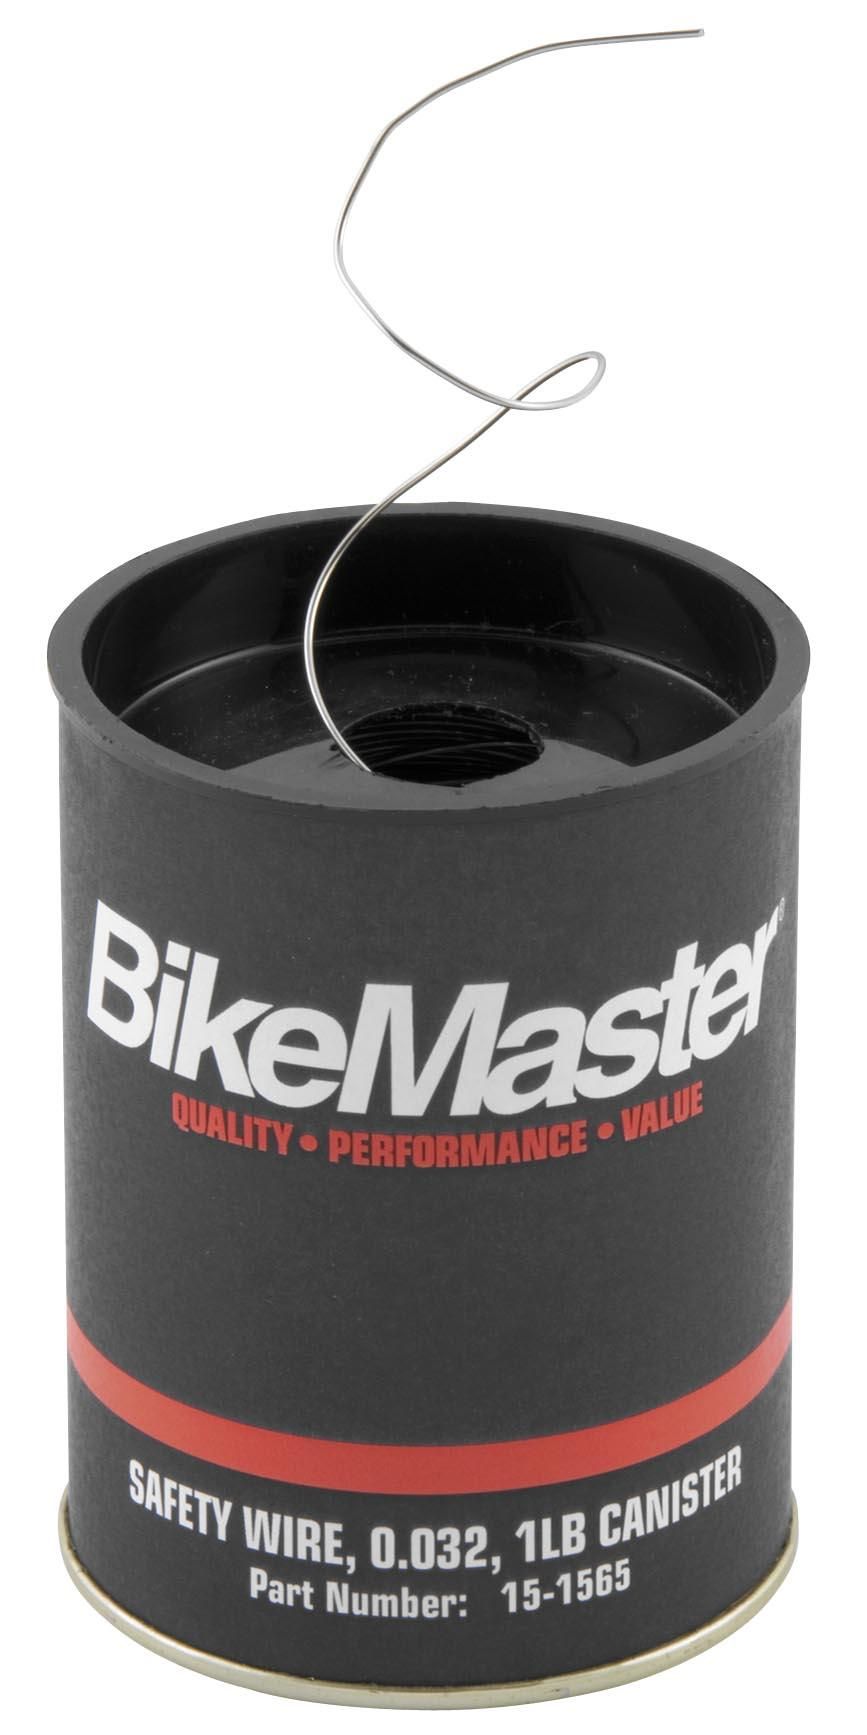 3W5K-BIKEMASTER-151565 Safety Wire 0.032in. - 1lb. Can